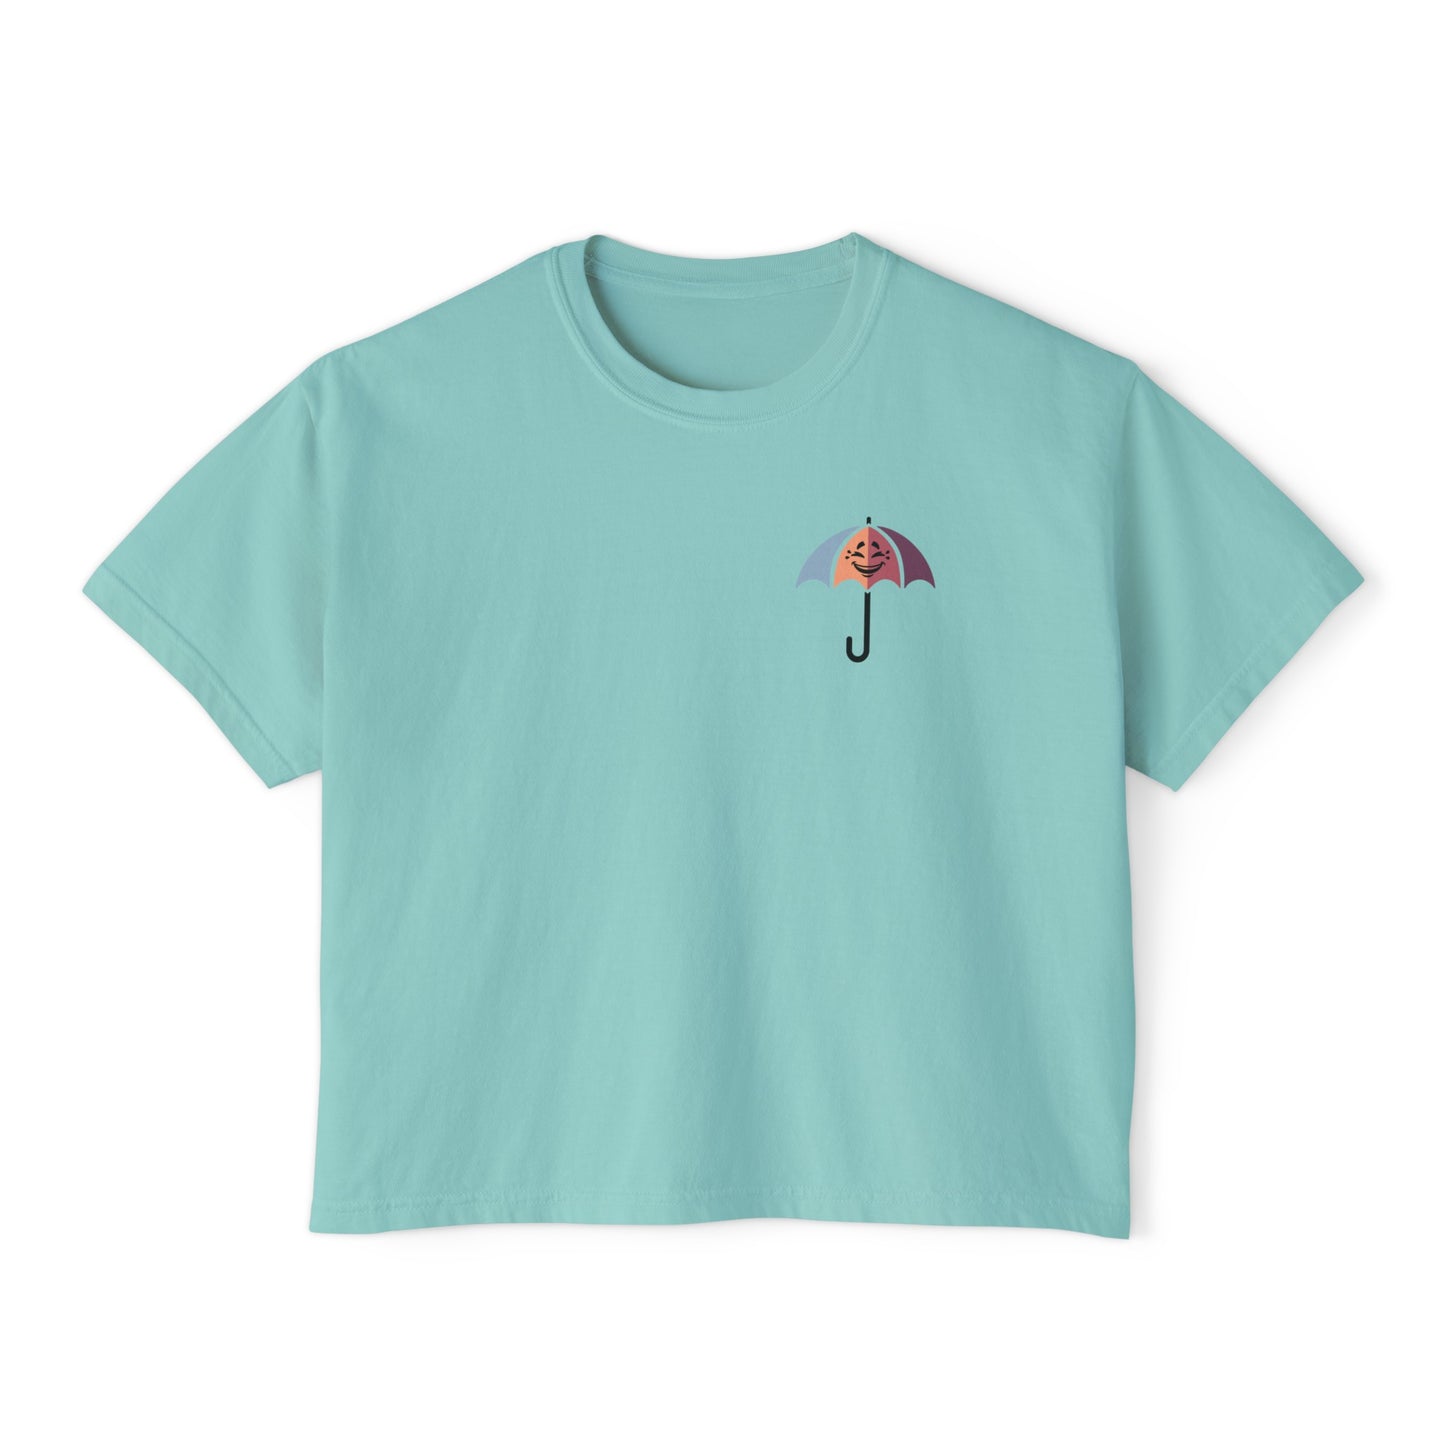 Dry Humor Goods™ Boxy Cropped T-Shirt